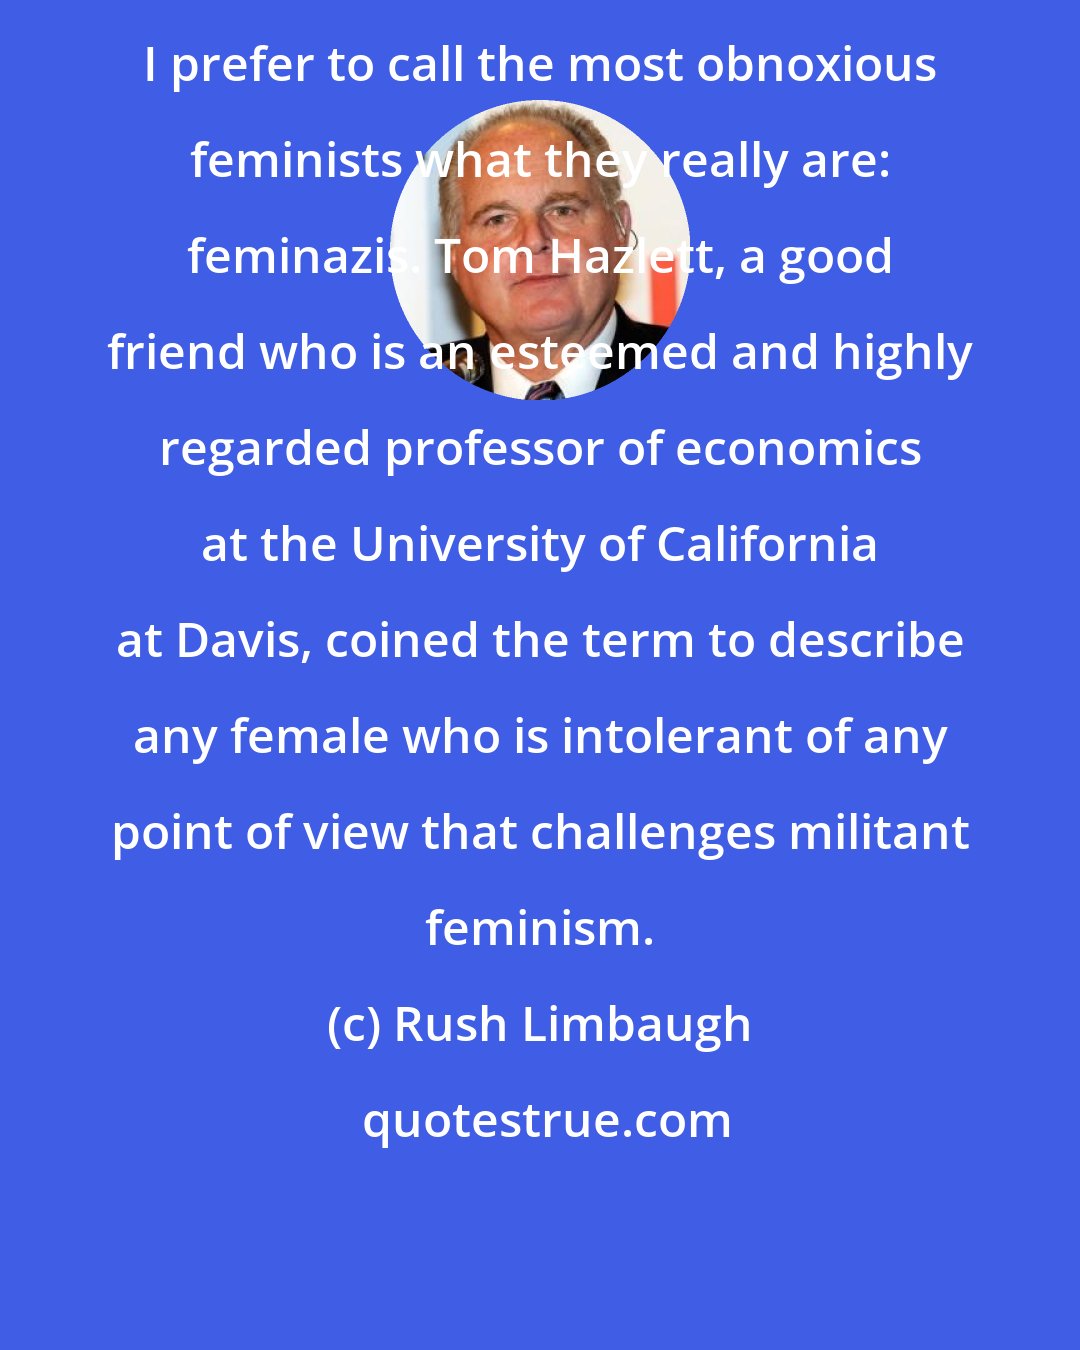 Rush Limbaugh: I prefer to call the most obnoxious feminists what they really are: feminazis. Tom Hazlett, a good friend who is an esteemed and highly regarded professor of economics at the University of California at Davis, coined the term to describe any female who is intolerant of any point of view that challenges militant feminism.